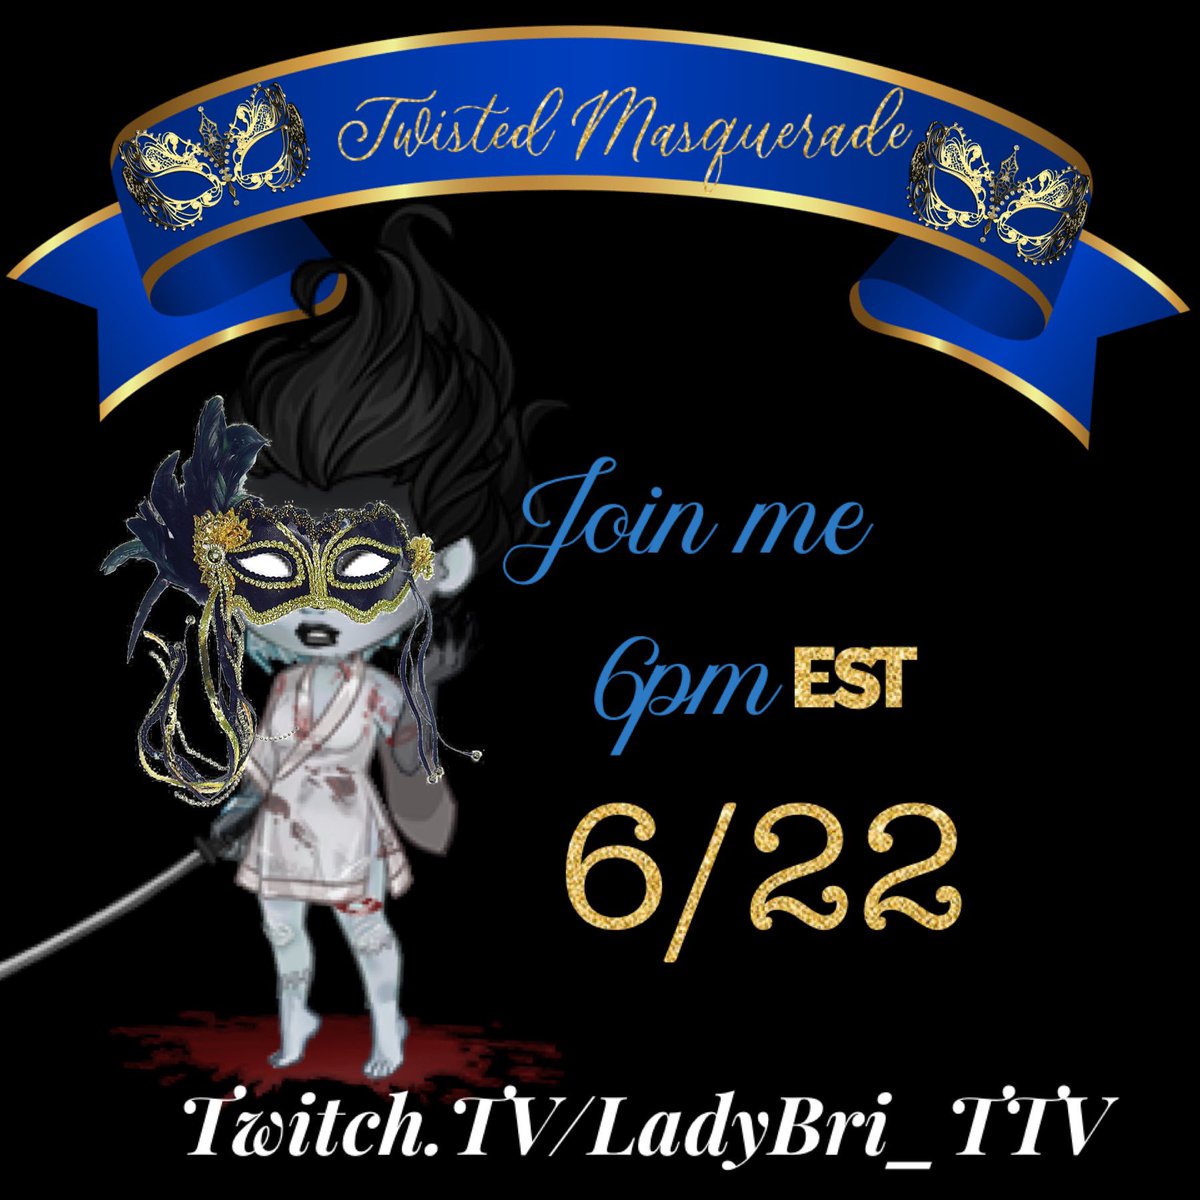 Hello Zombries, Set your Calendar’s 6/22 at 6pm EST ❣️🎭❣️ Join us for The Twisted Masquerade Event! I’m super excited. We will be continuing our Journey to P100!! It’s gonna be a Twisted Killer Time♥️🧟‍♀️🧟♥️ #zombries #dbd #twistedmasquerade #Livestream #joinus